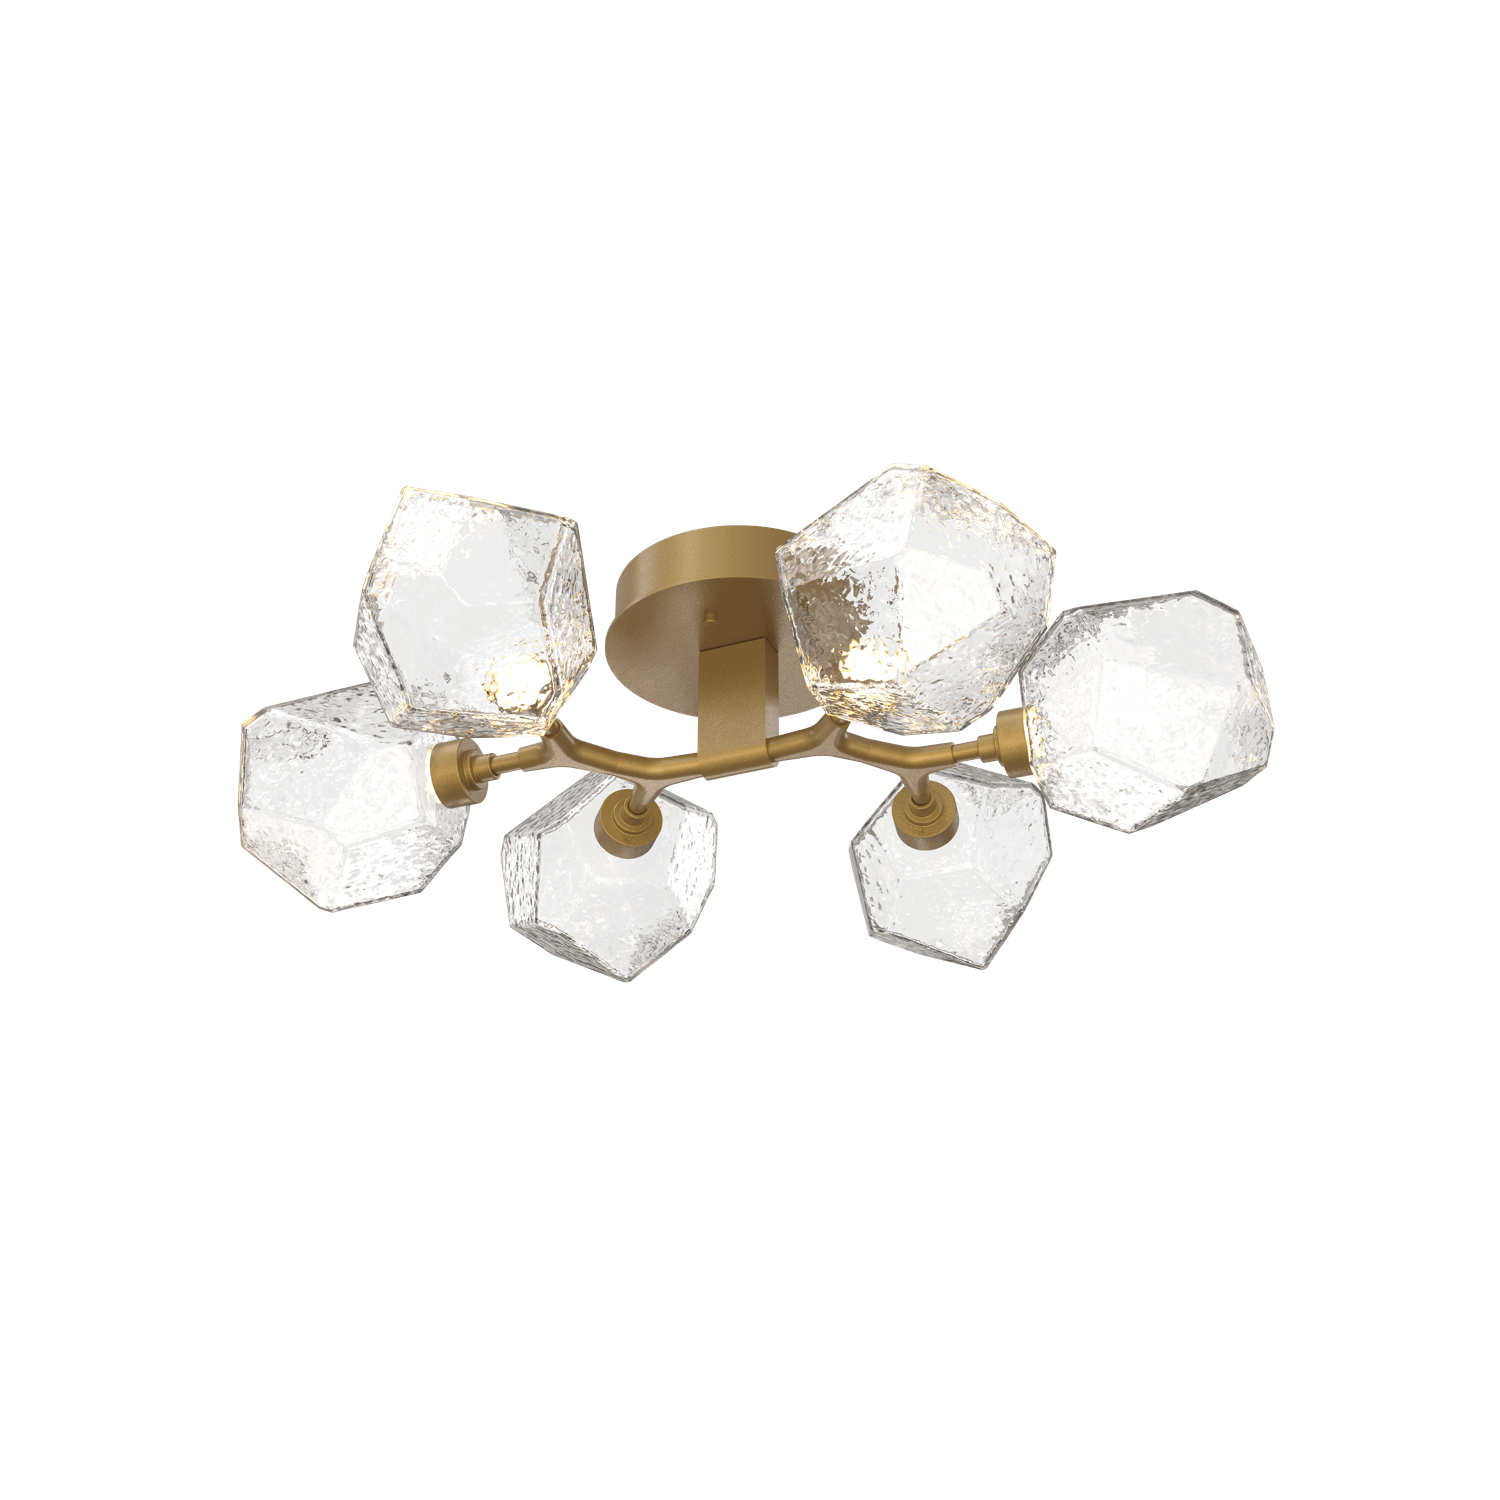 CLB0039-01-GB-C-Hammerton-Studio-Gem-6-light-organic-flush-mount-light-with-gilded-brass-finish-and-clear-blown-glass-shades-and-LED-lamping